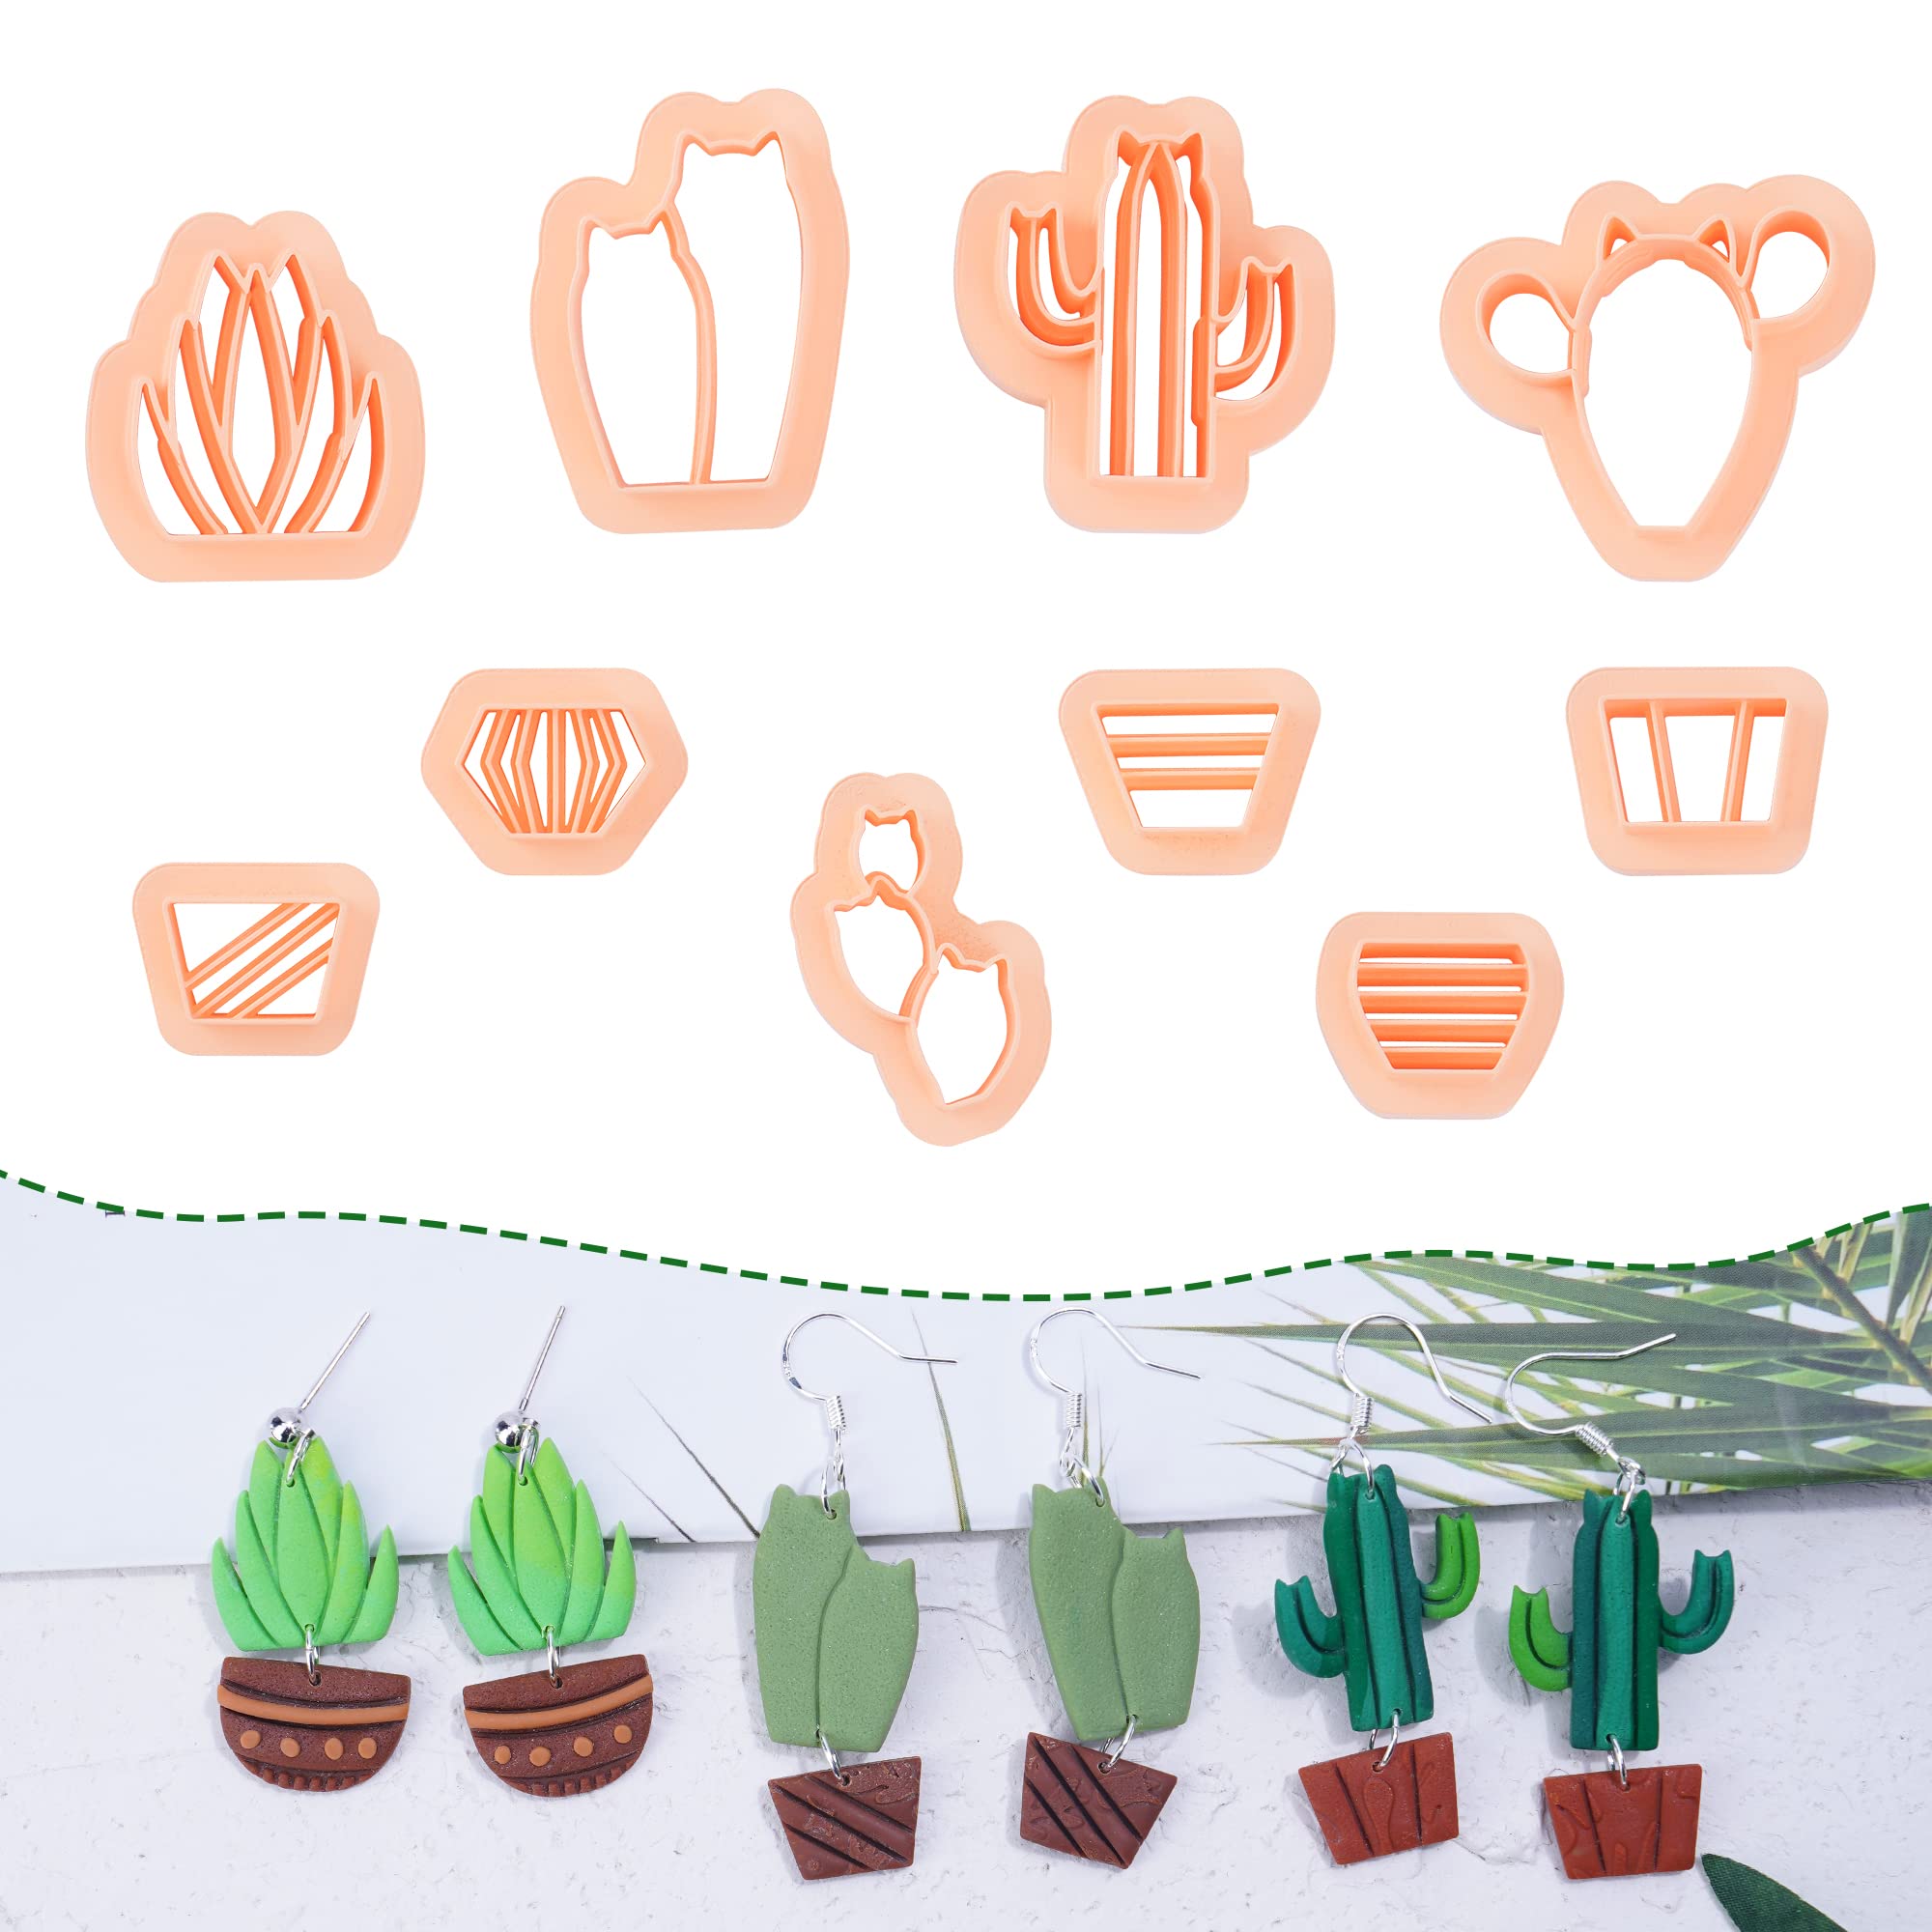 Puocaon Cactus Cat Clay Cutters Cute Potted Plants 10 Pcs